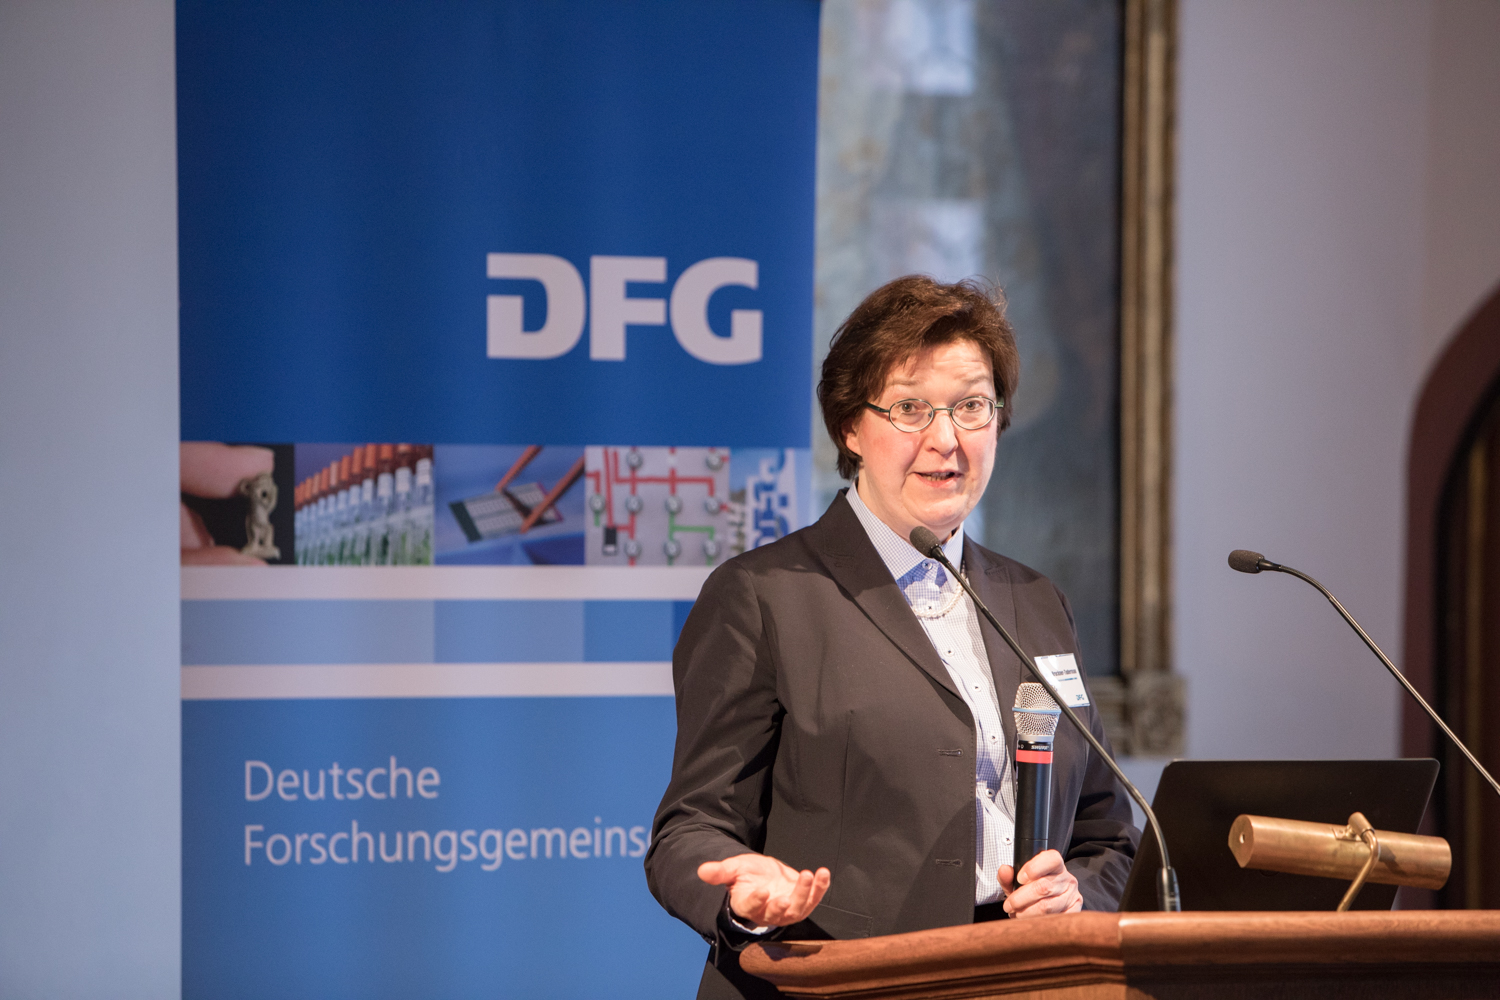 DFG Vice President Leena Bruckner-Tuderman thanks the participants for a successful symposium